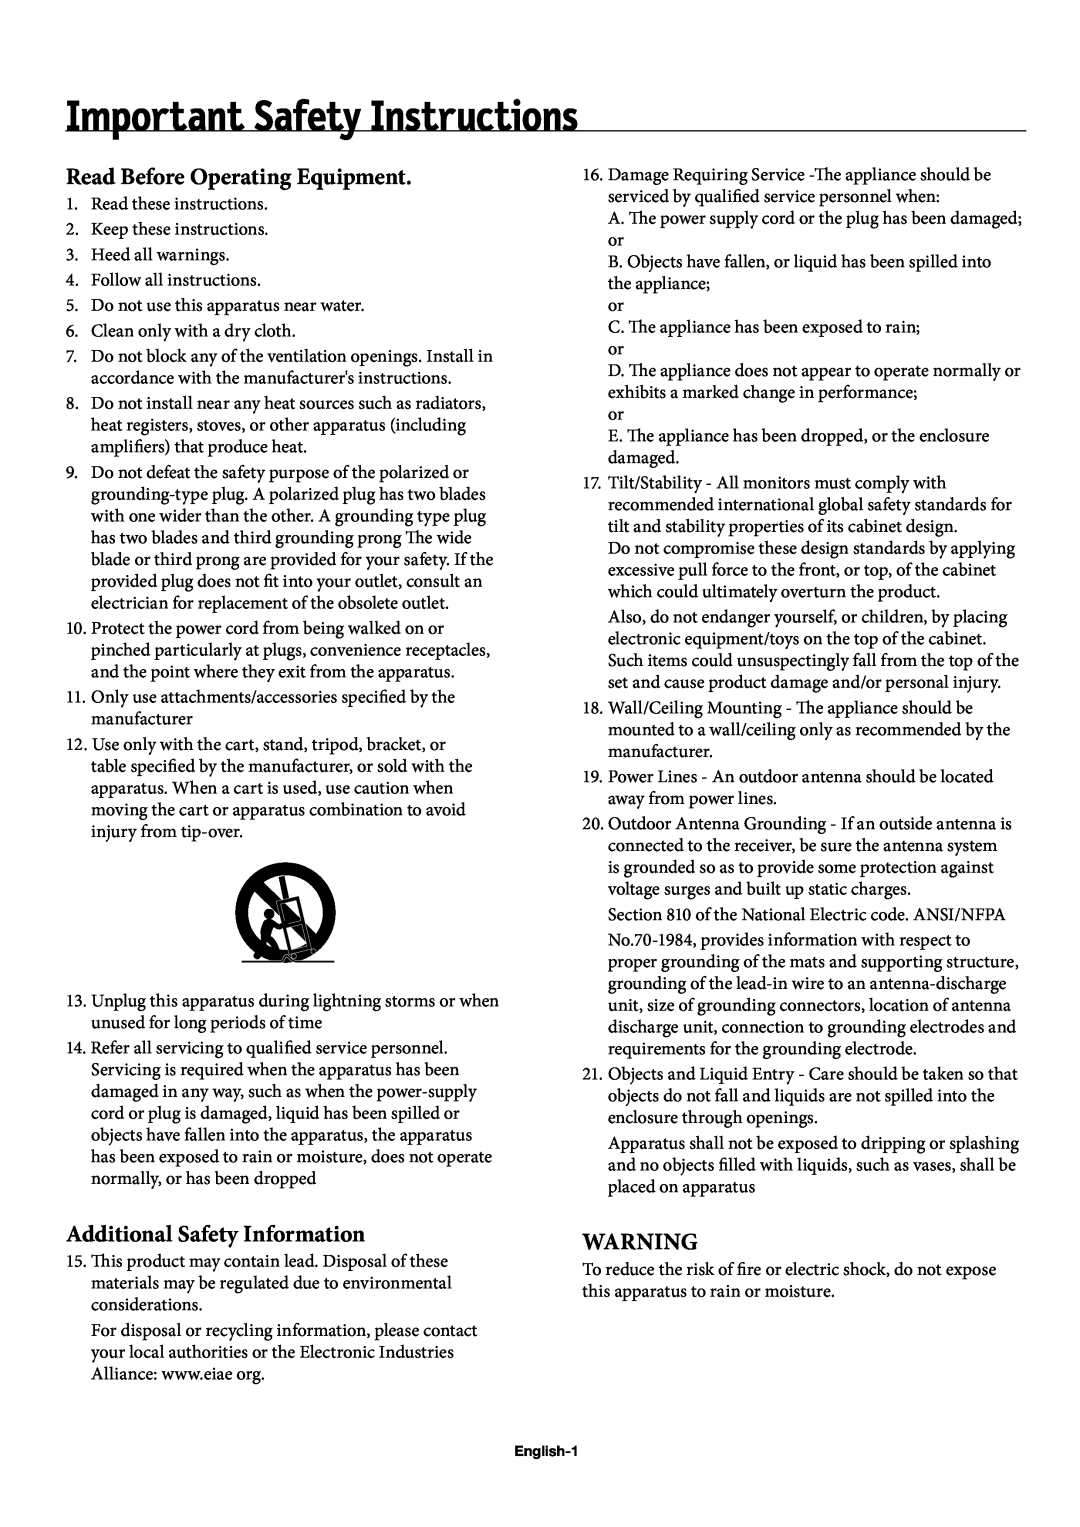 NEC 50XP10, 42XP10, 60XP10 Important Safety Instructions, Read Before Operating Equipment, Additional Safety Information 